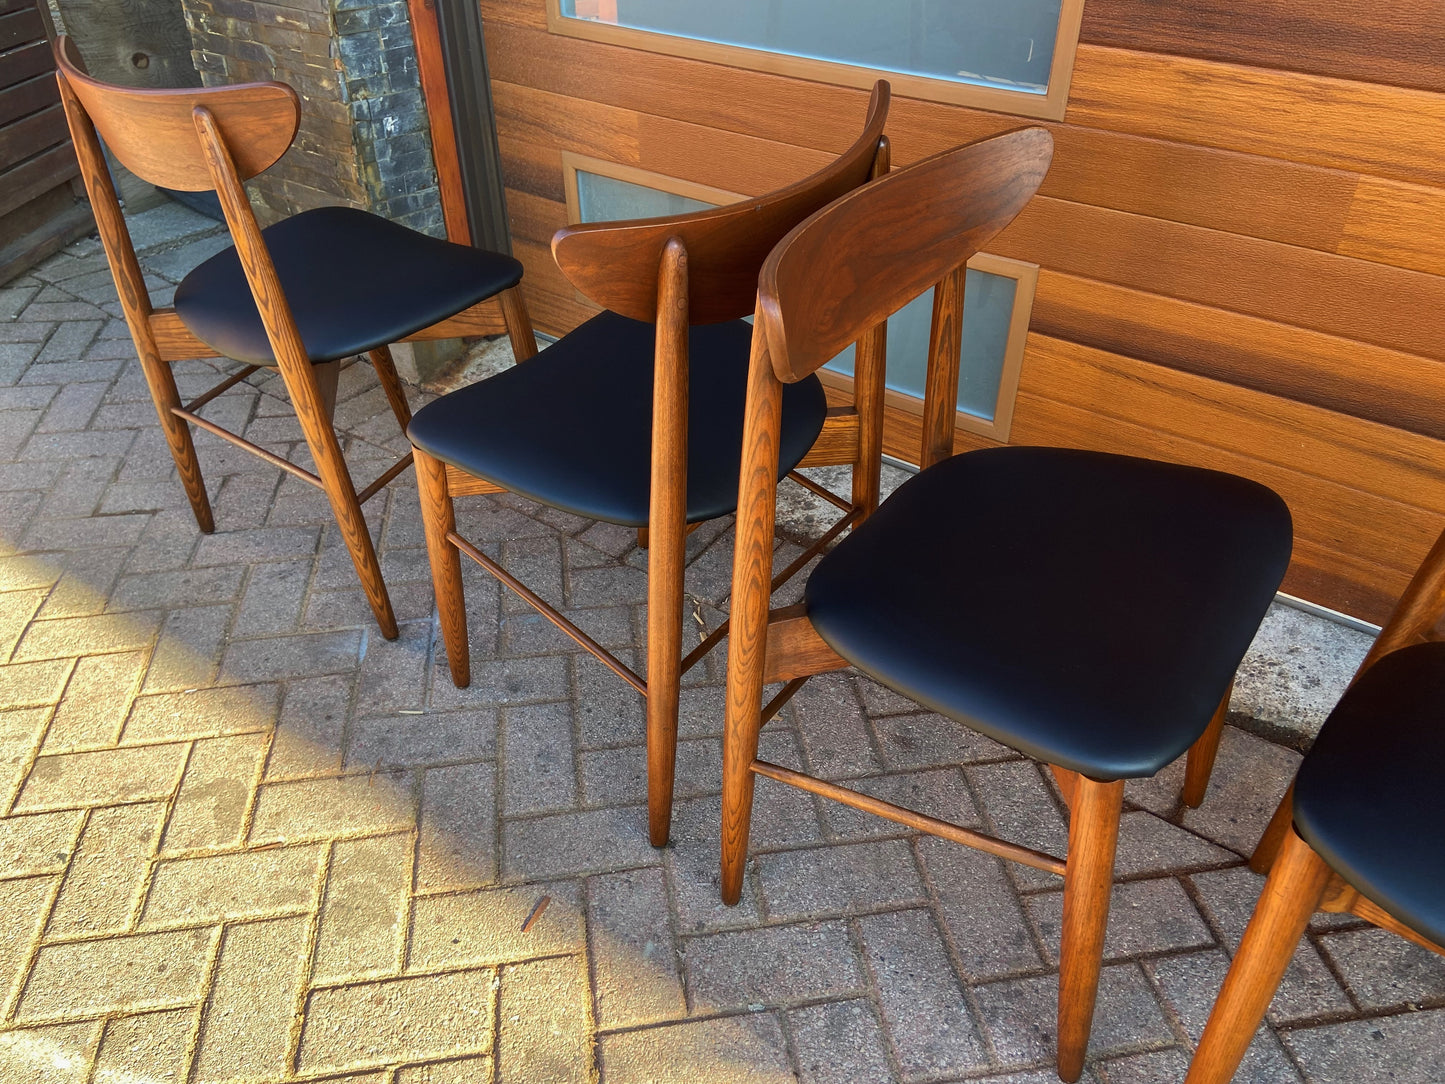 4 REFINISHED REUPHOLSTERED Mid Century Modern Walnut Chairs, Large